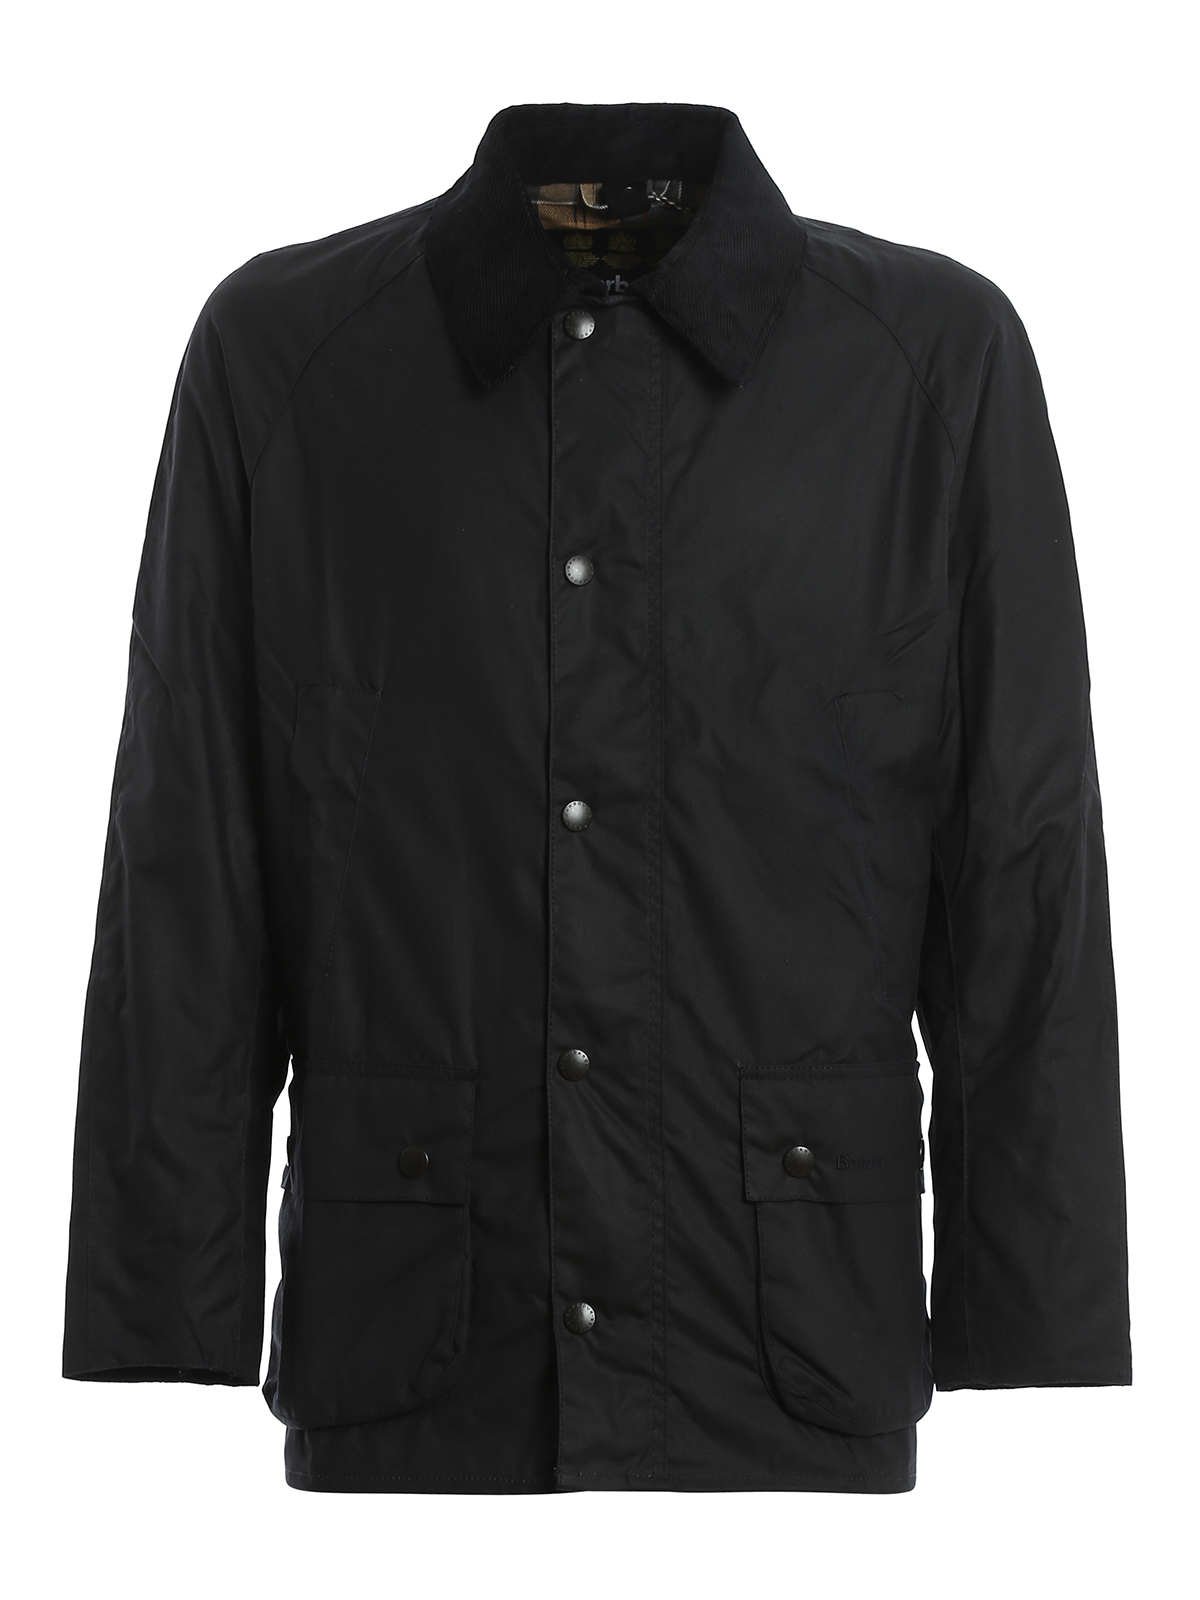 Giacche casual Barbour - Giacca Ashby - MWX0339NY92 | iKRIX shop 